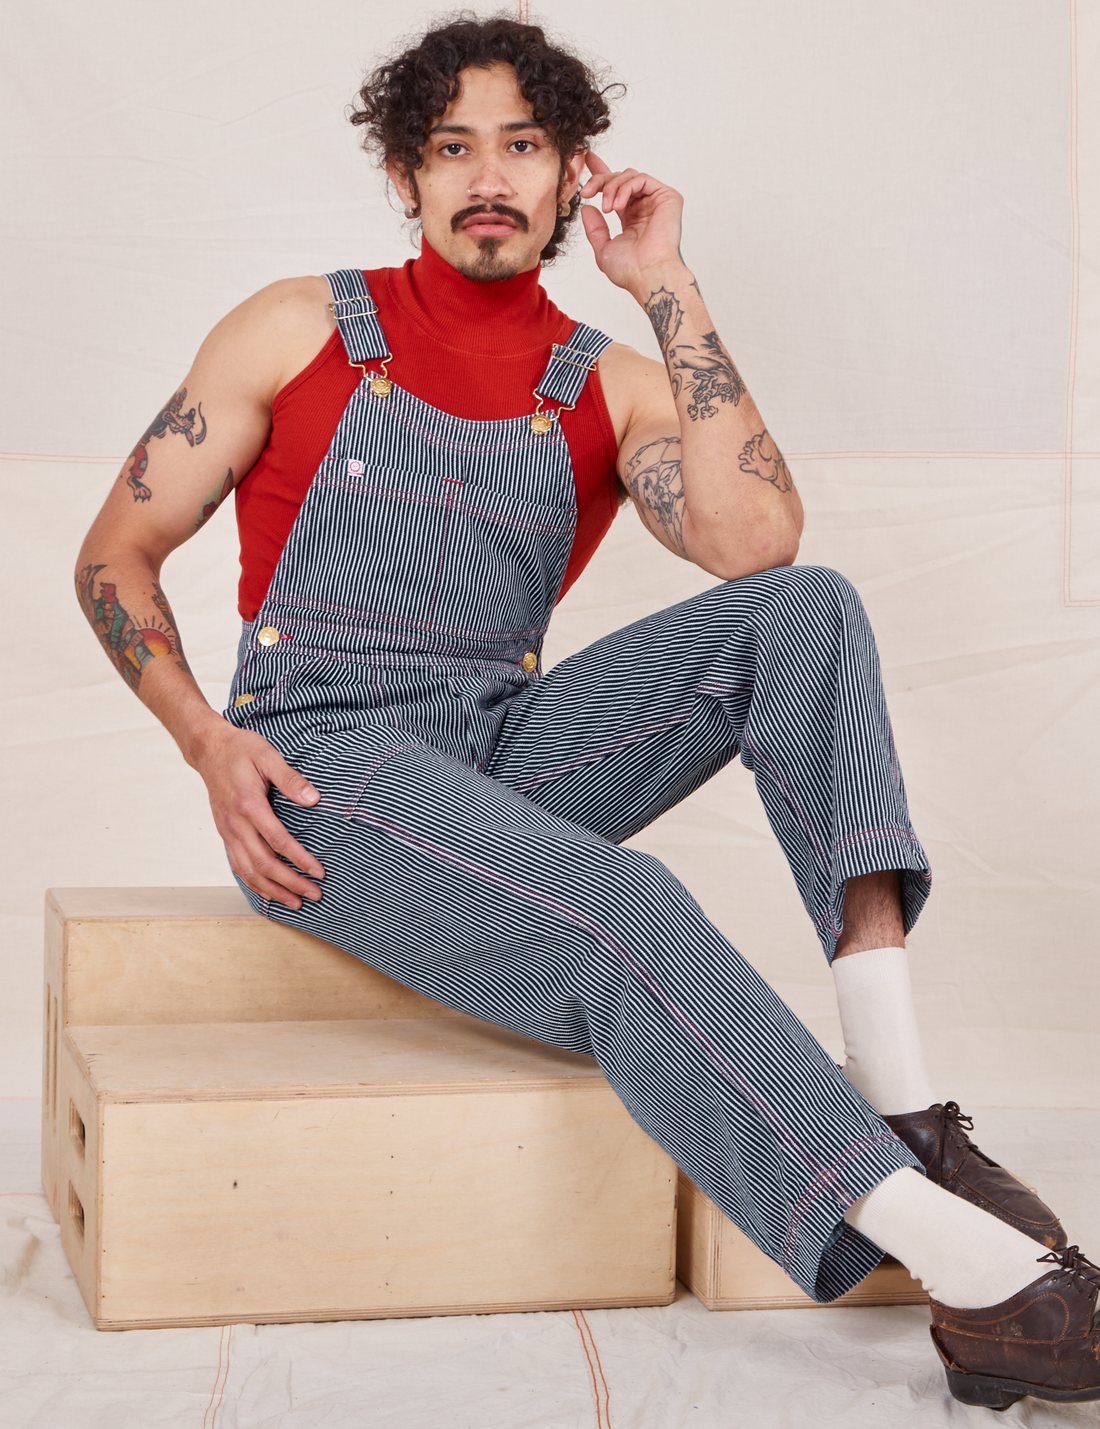 Jesse is 5'8" and wearing XXS Railroad Stripe Denim Original Overalls paired with paprika Sleeveless Turtleneck 